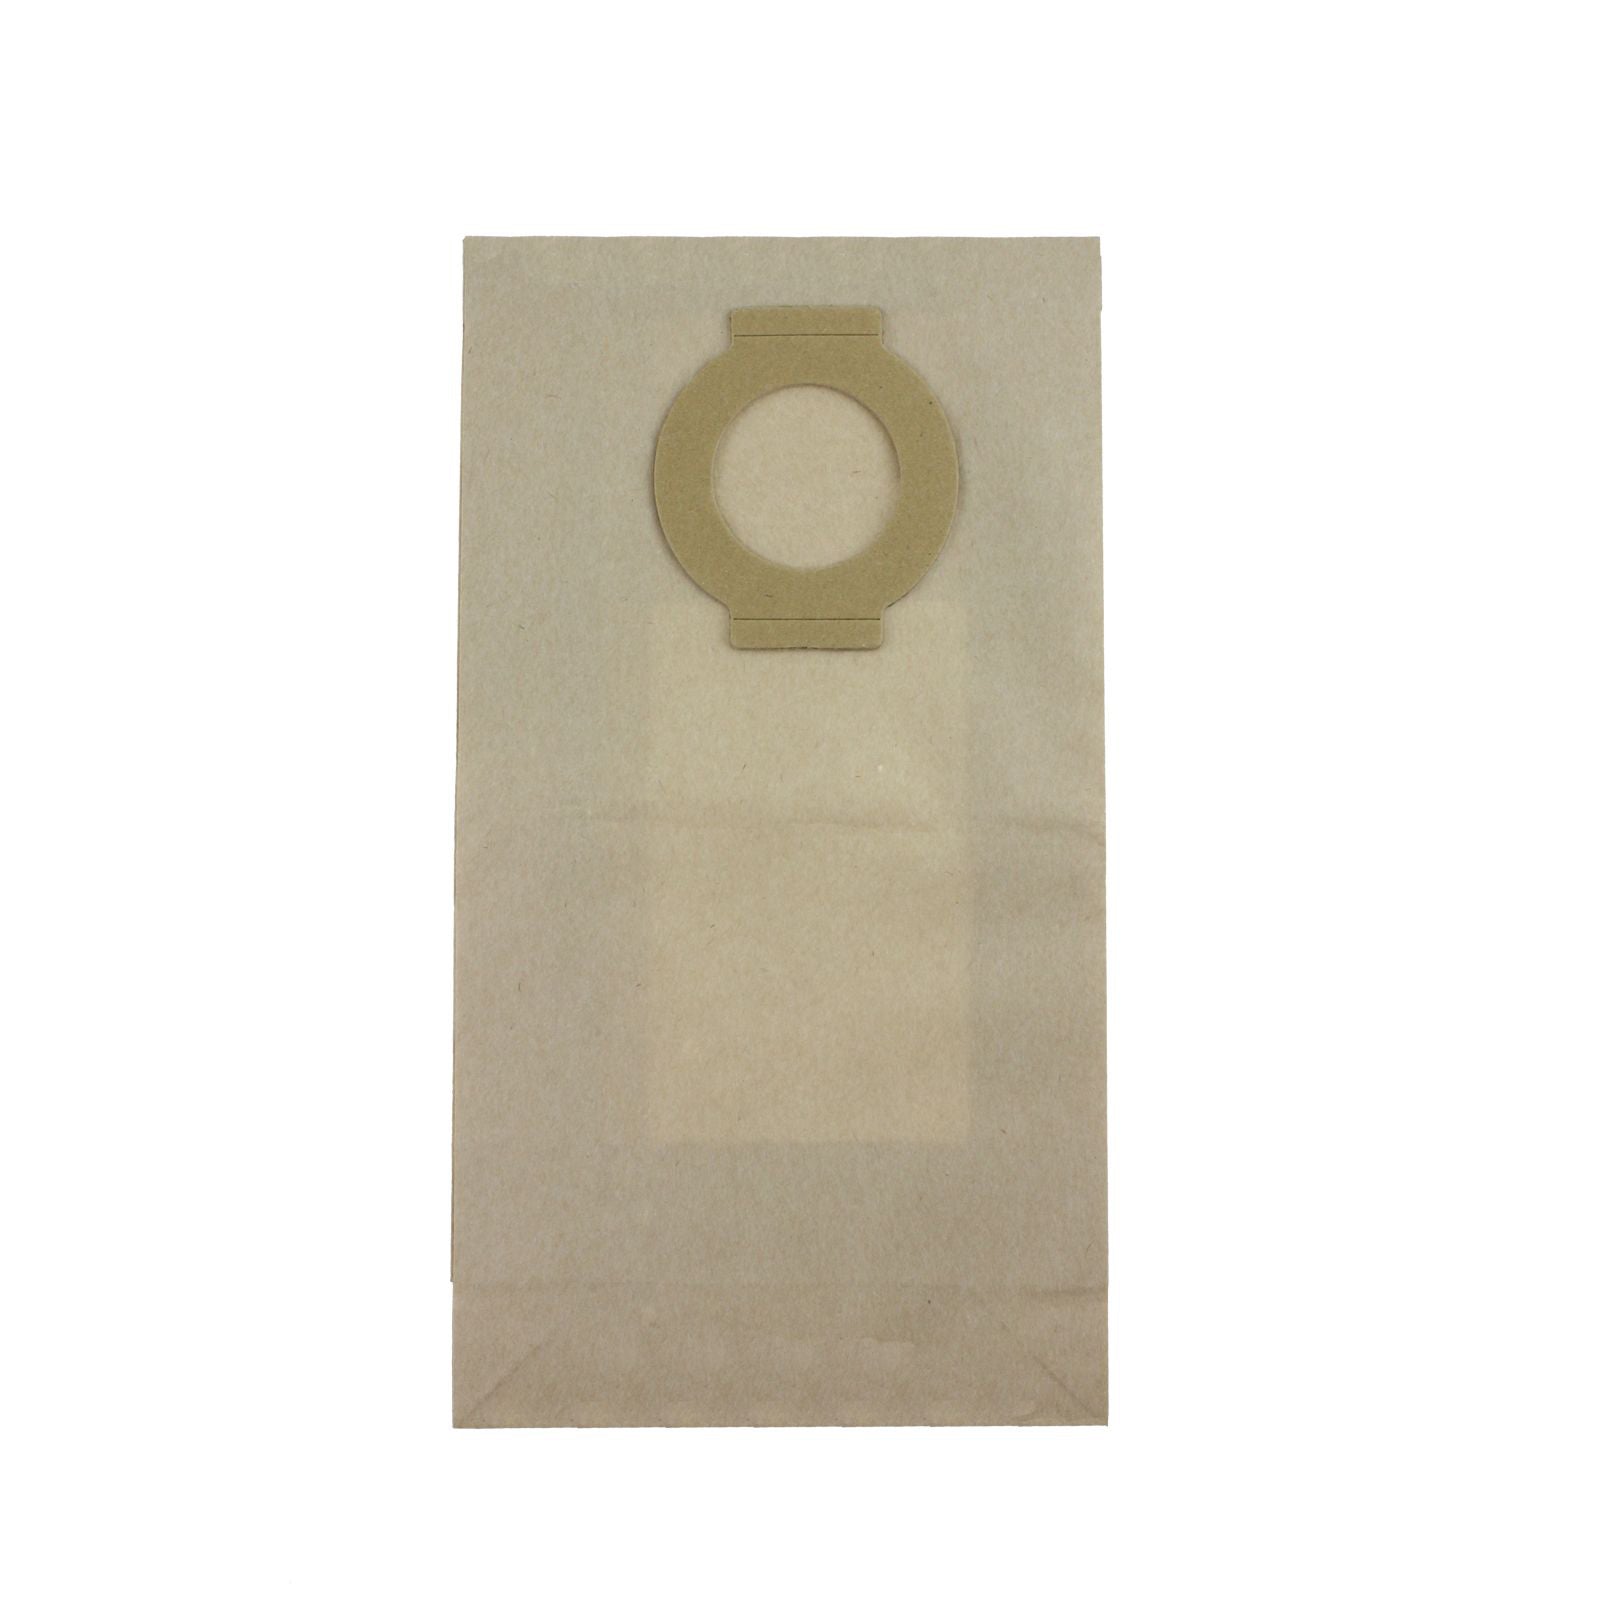 Vacuum Cleaner Dust Bags x 10 compatible with Hoover vacuum cleaner